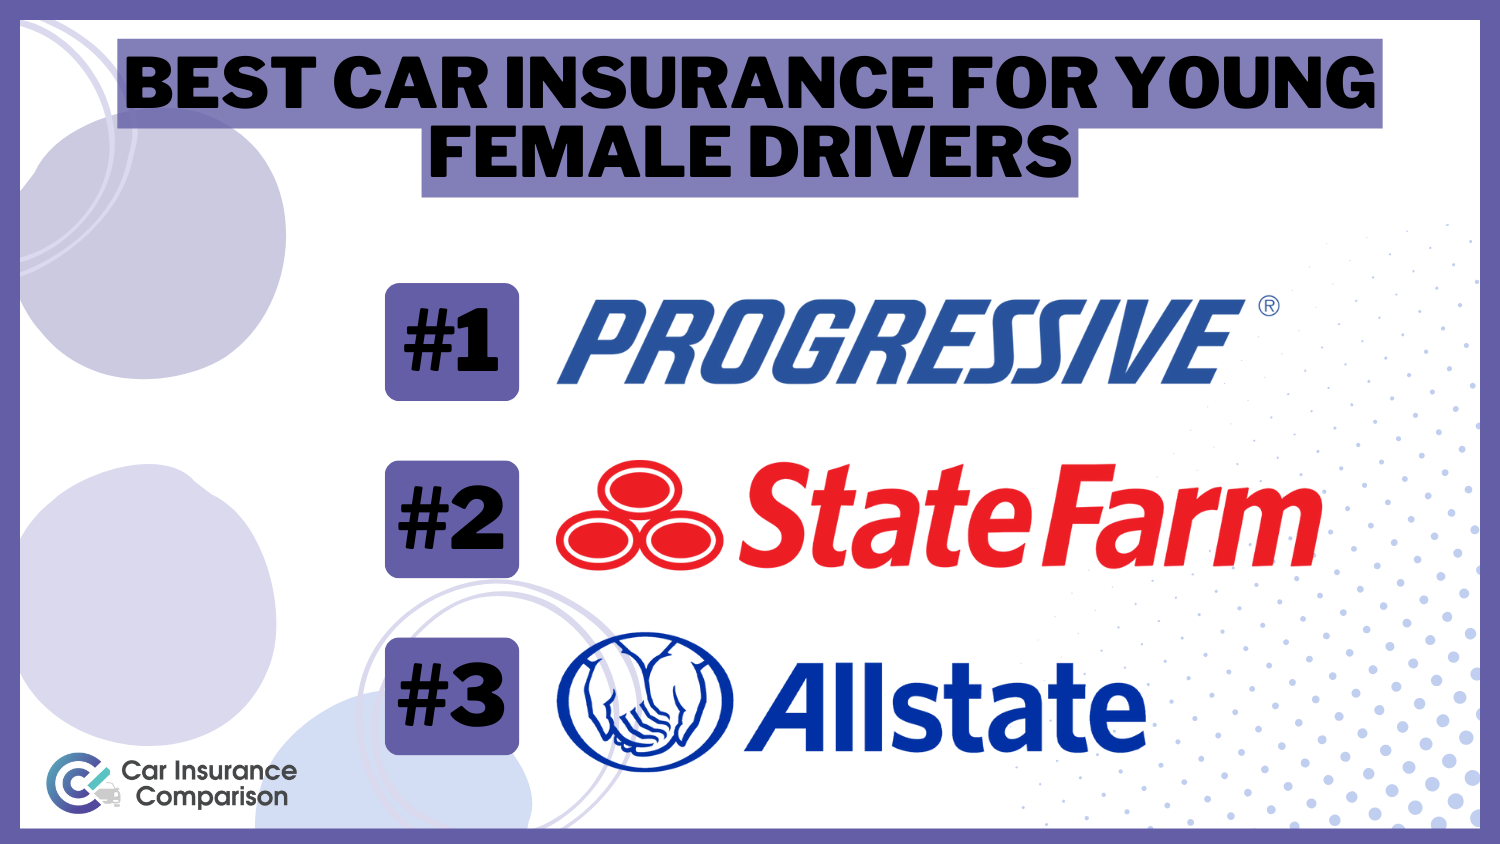 Progressive, State Farm: Best Car Insurance for Young Female Drivers